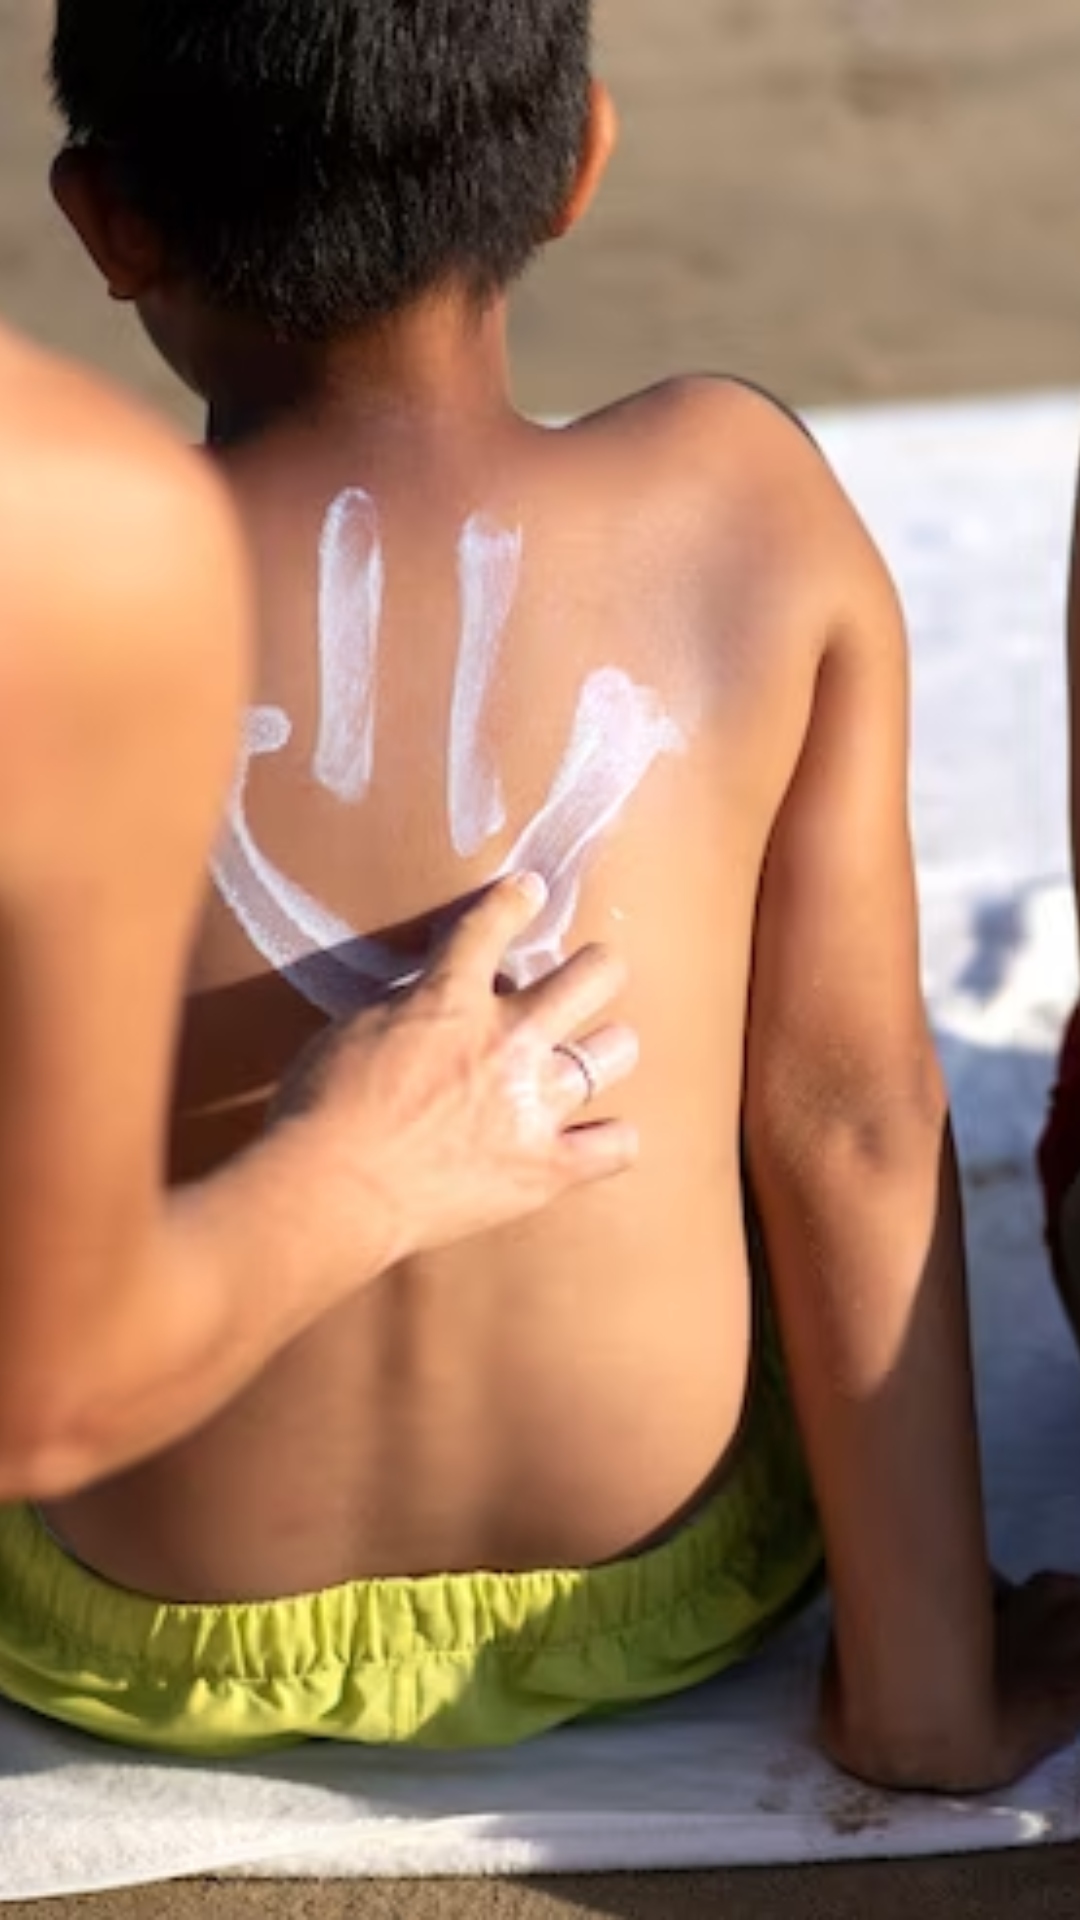 Mistakes you make while applying sunscreen